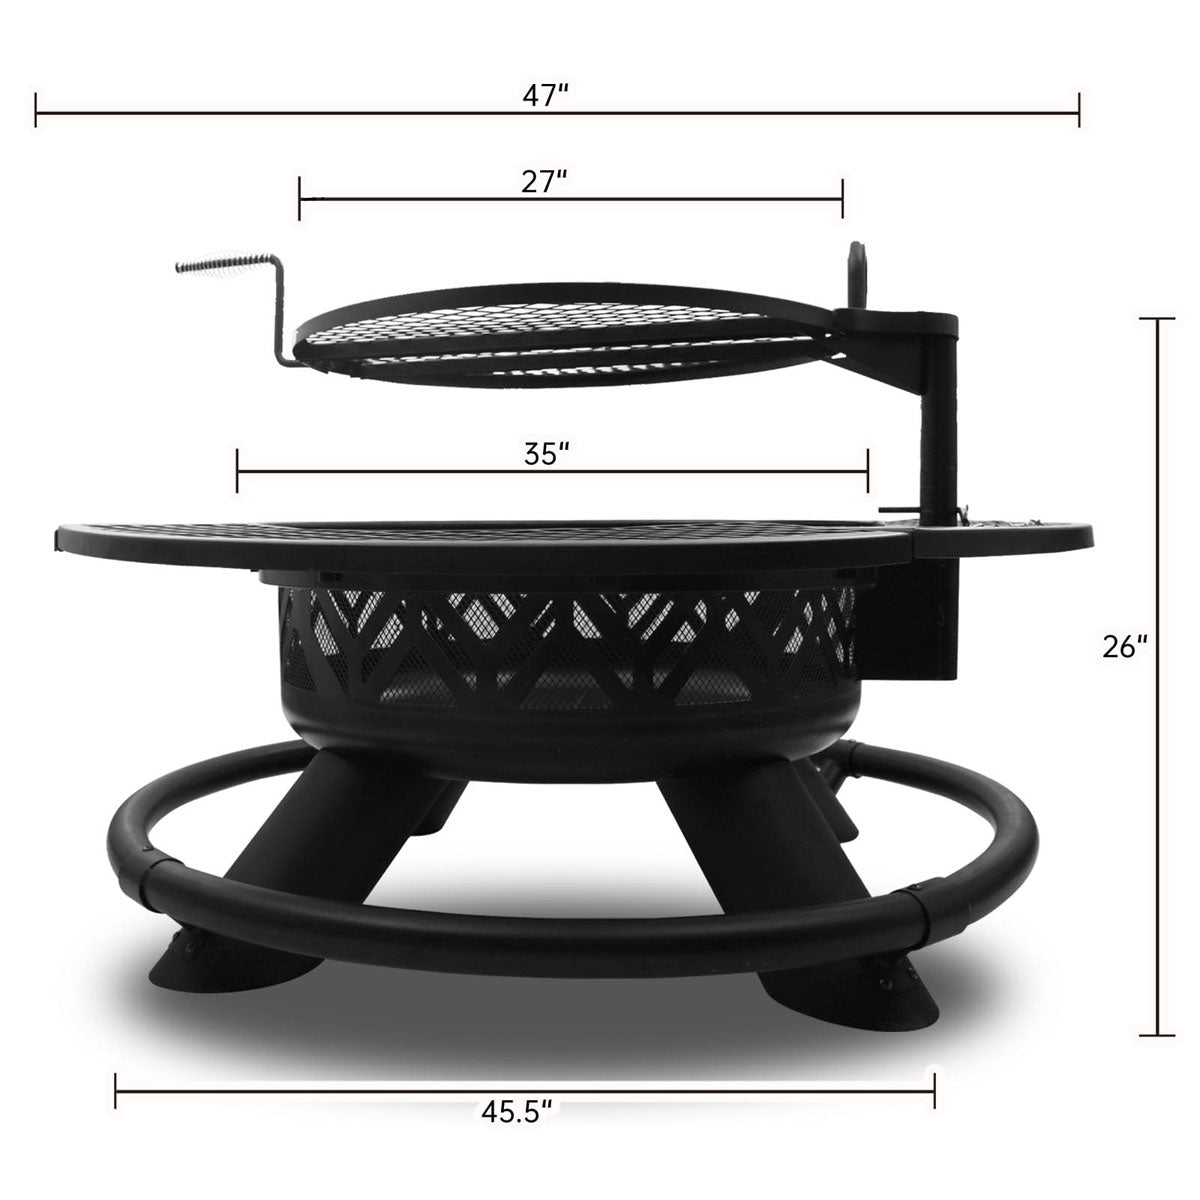 47“ Steel Round Fire Pit with BBQ Grate for Patio Outdoor, Wood Burning Firepit